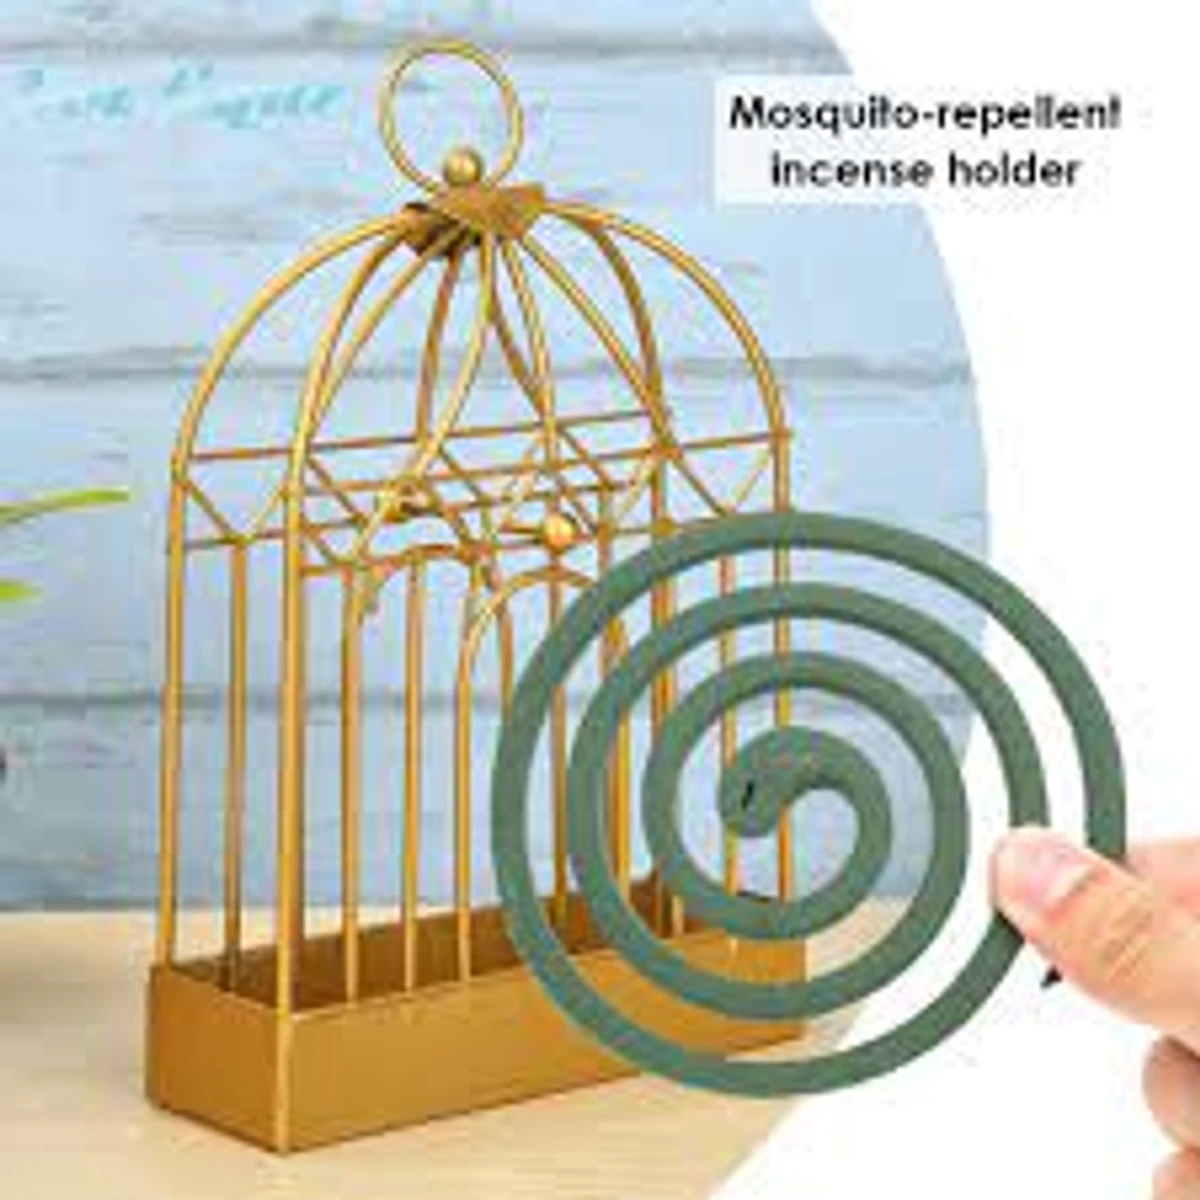 Bird Cage Mosquito Coil Holder, Creative Nordic Retro Iron Insect Mosquito Coil Holder, Repellent Rack for Hanging Handle Summer Anti Mosquito Supplies